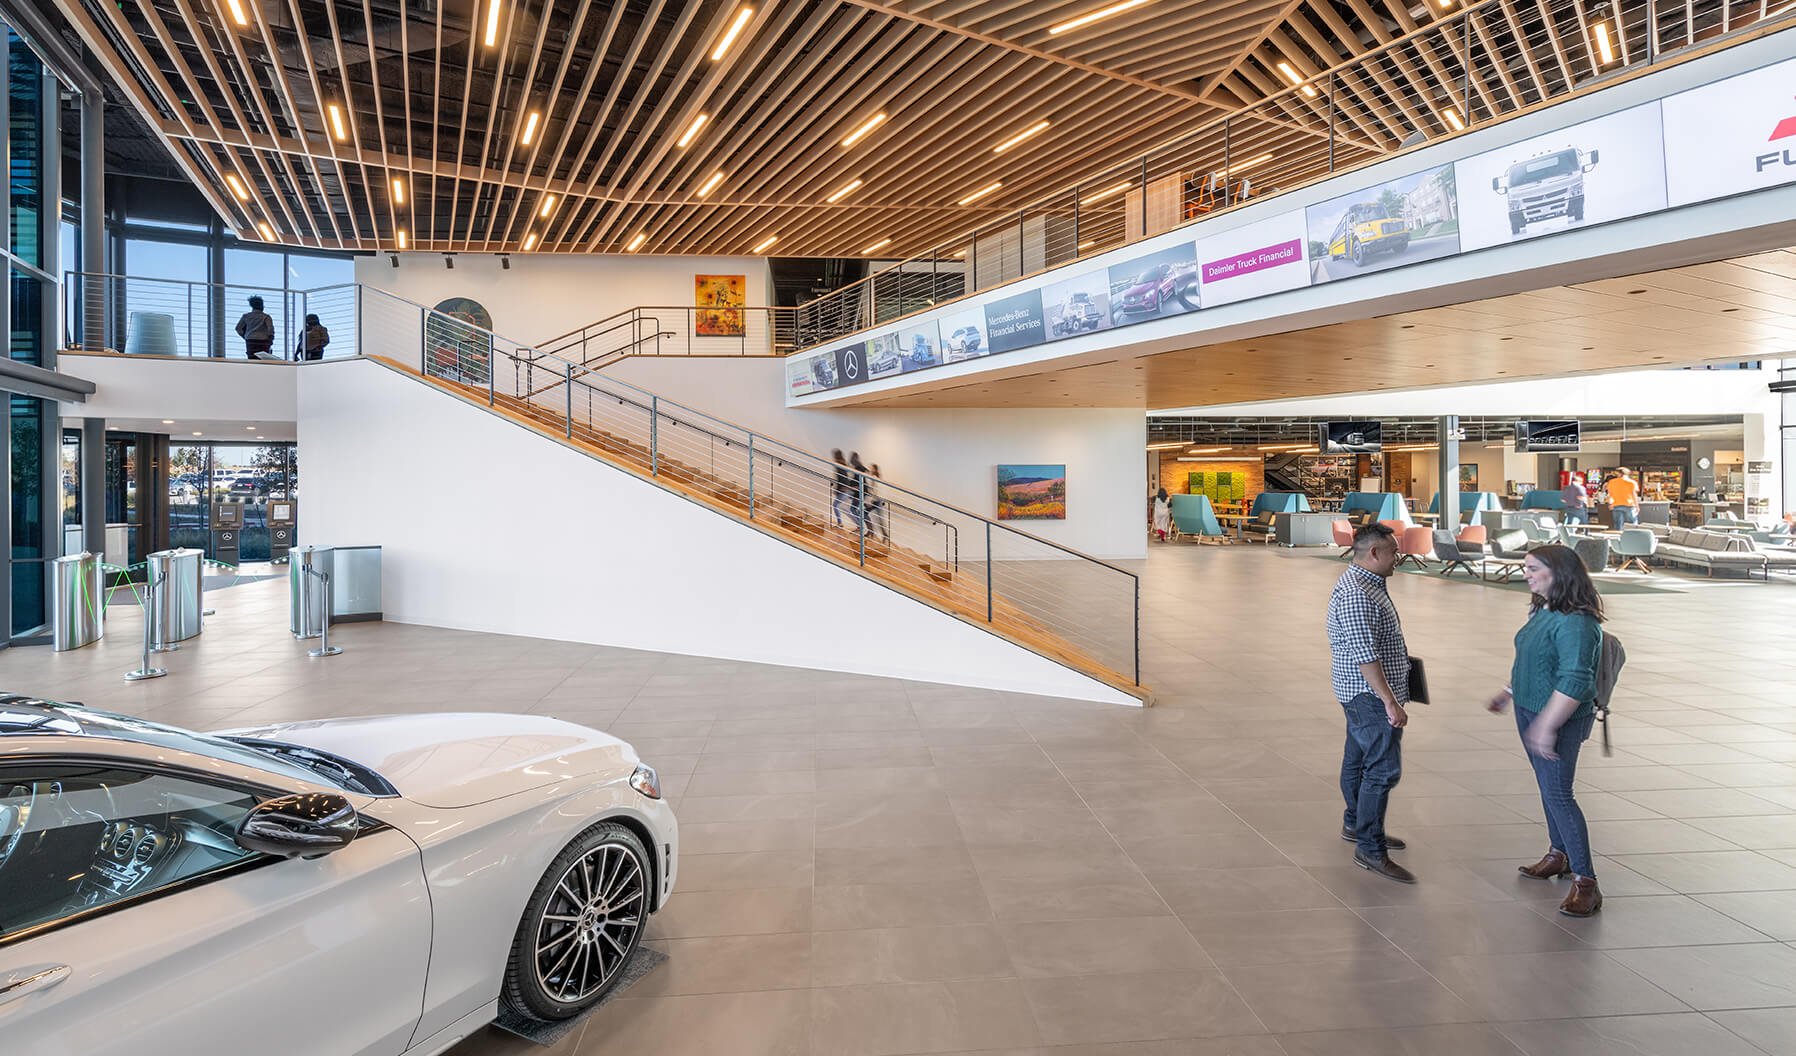 Upon entering the building, you are introduced to an impressive open space showcasing a Mercedes-Benz vehicle. Just beyond the staircase is a large gathering area with a cafeteria perfect for collaboration or individual relaxation. 